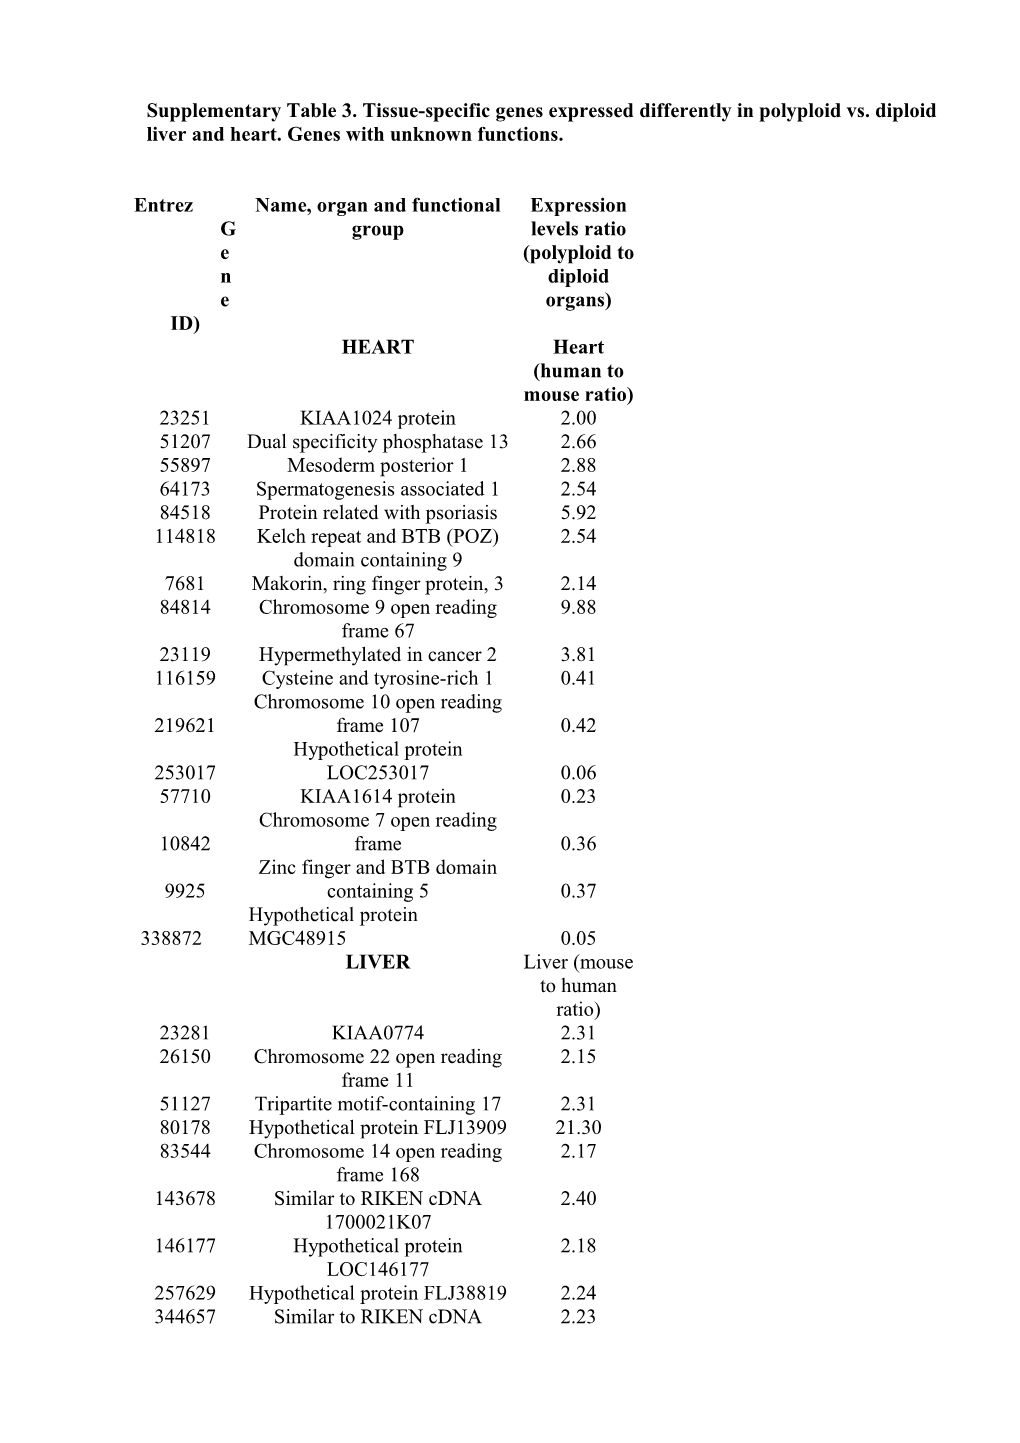 Supplementary Table 3. Tissue-Specific Genes Expressed Differently in Polyploid Vs. Diploid